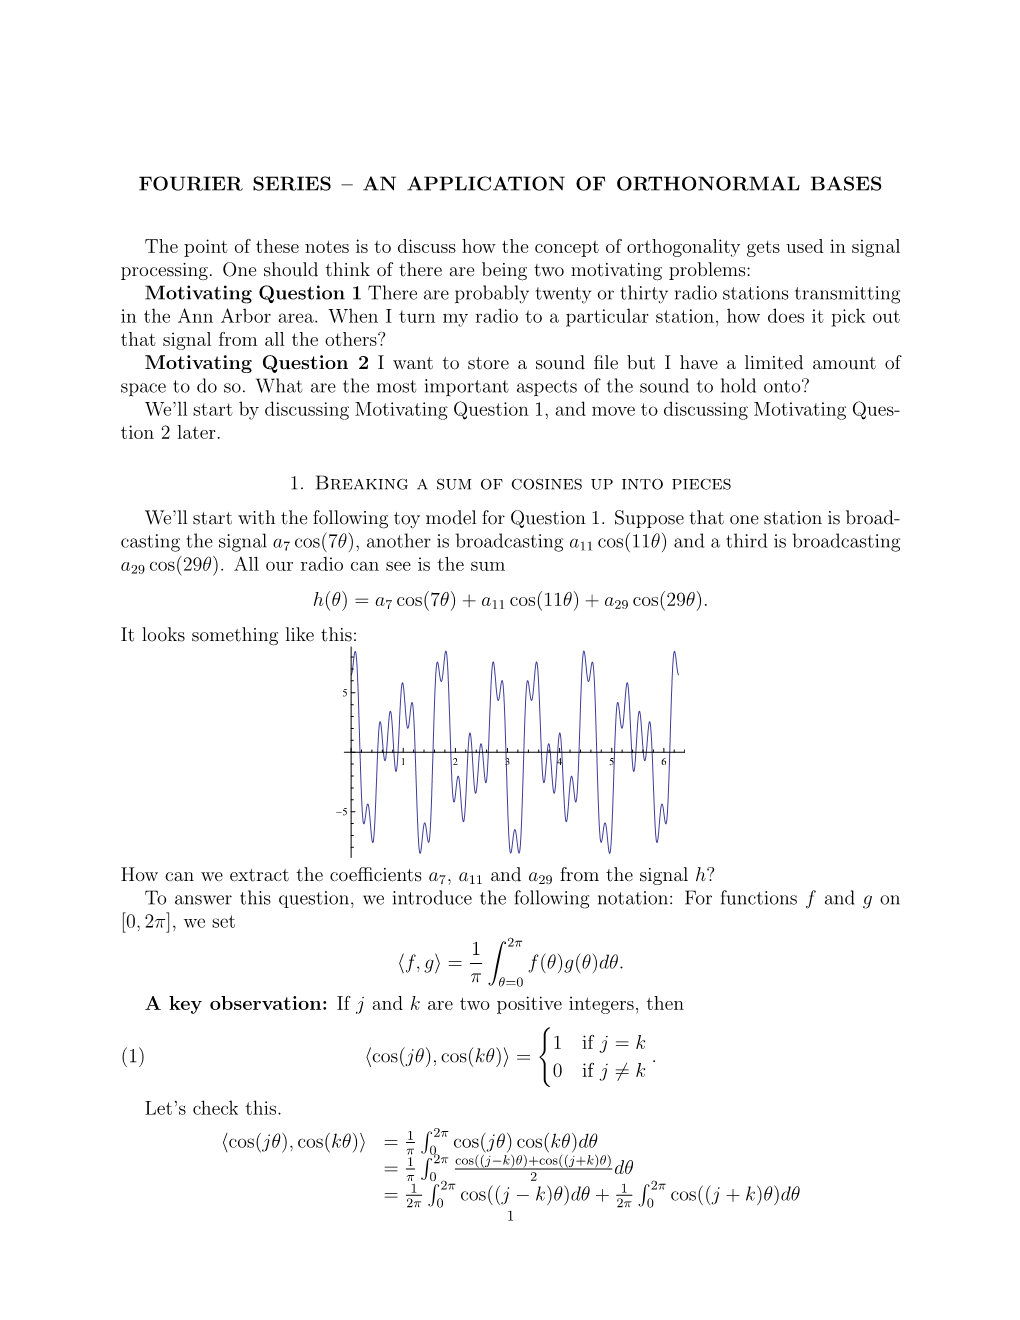 Fourier Series – an Application of Orthonormal Bases